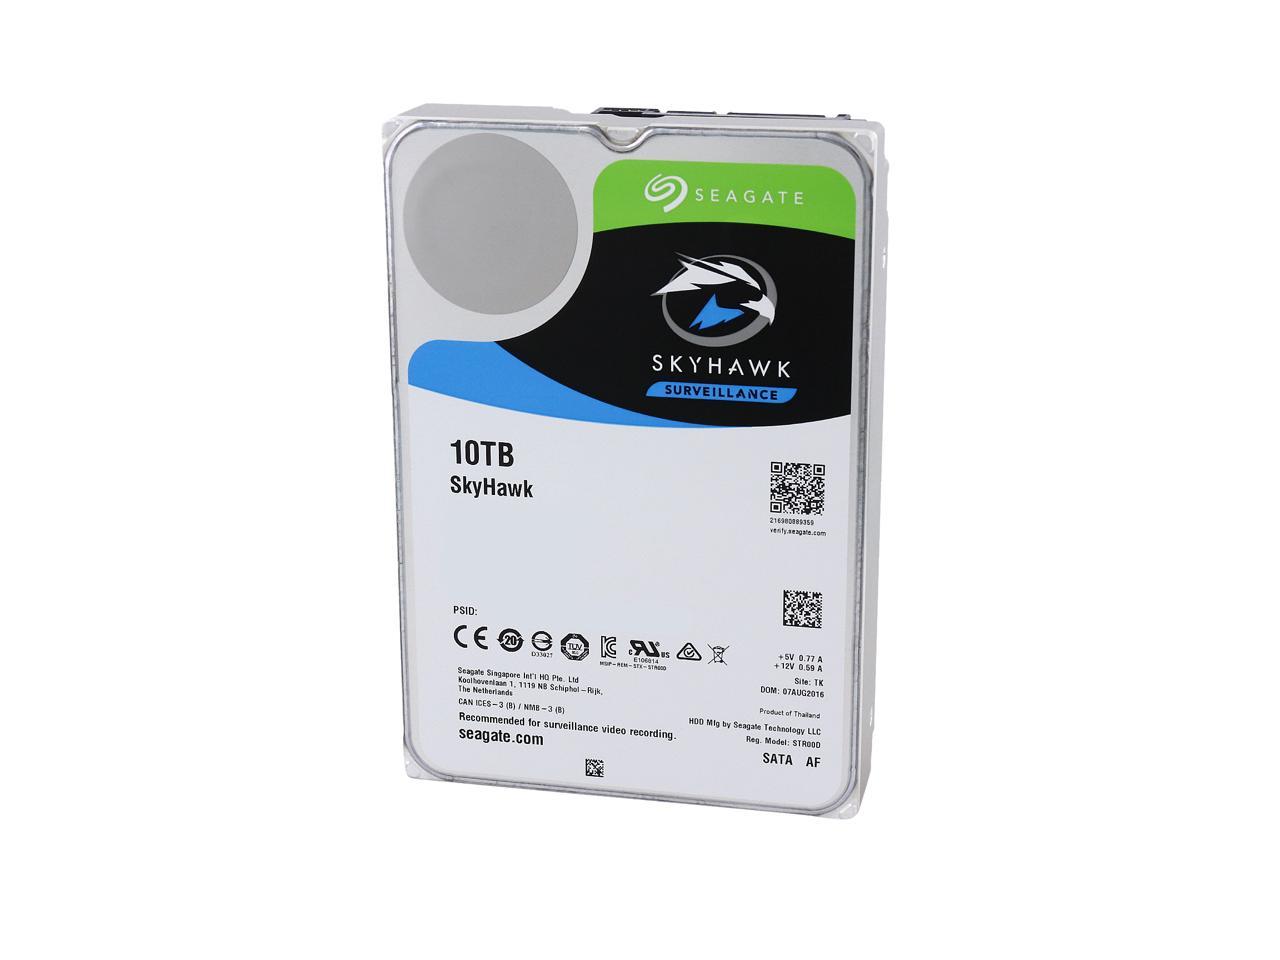 3.5 Inch SATA 6Gb/s 256MB Cache for DVR NVR Security Camera System with Drive Health Management Frustration Free Packaging Seagate Skyhawk 10TB Surveillance Internal Hard Drive HDD ST10000VX0004